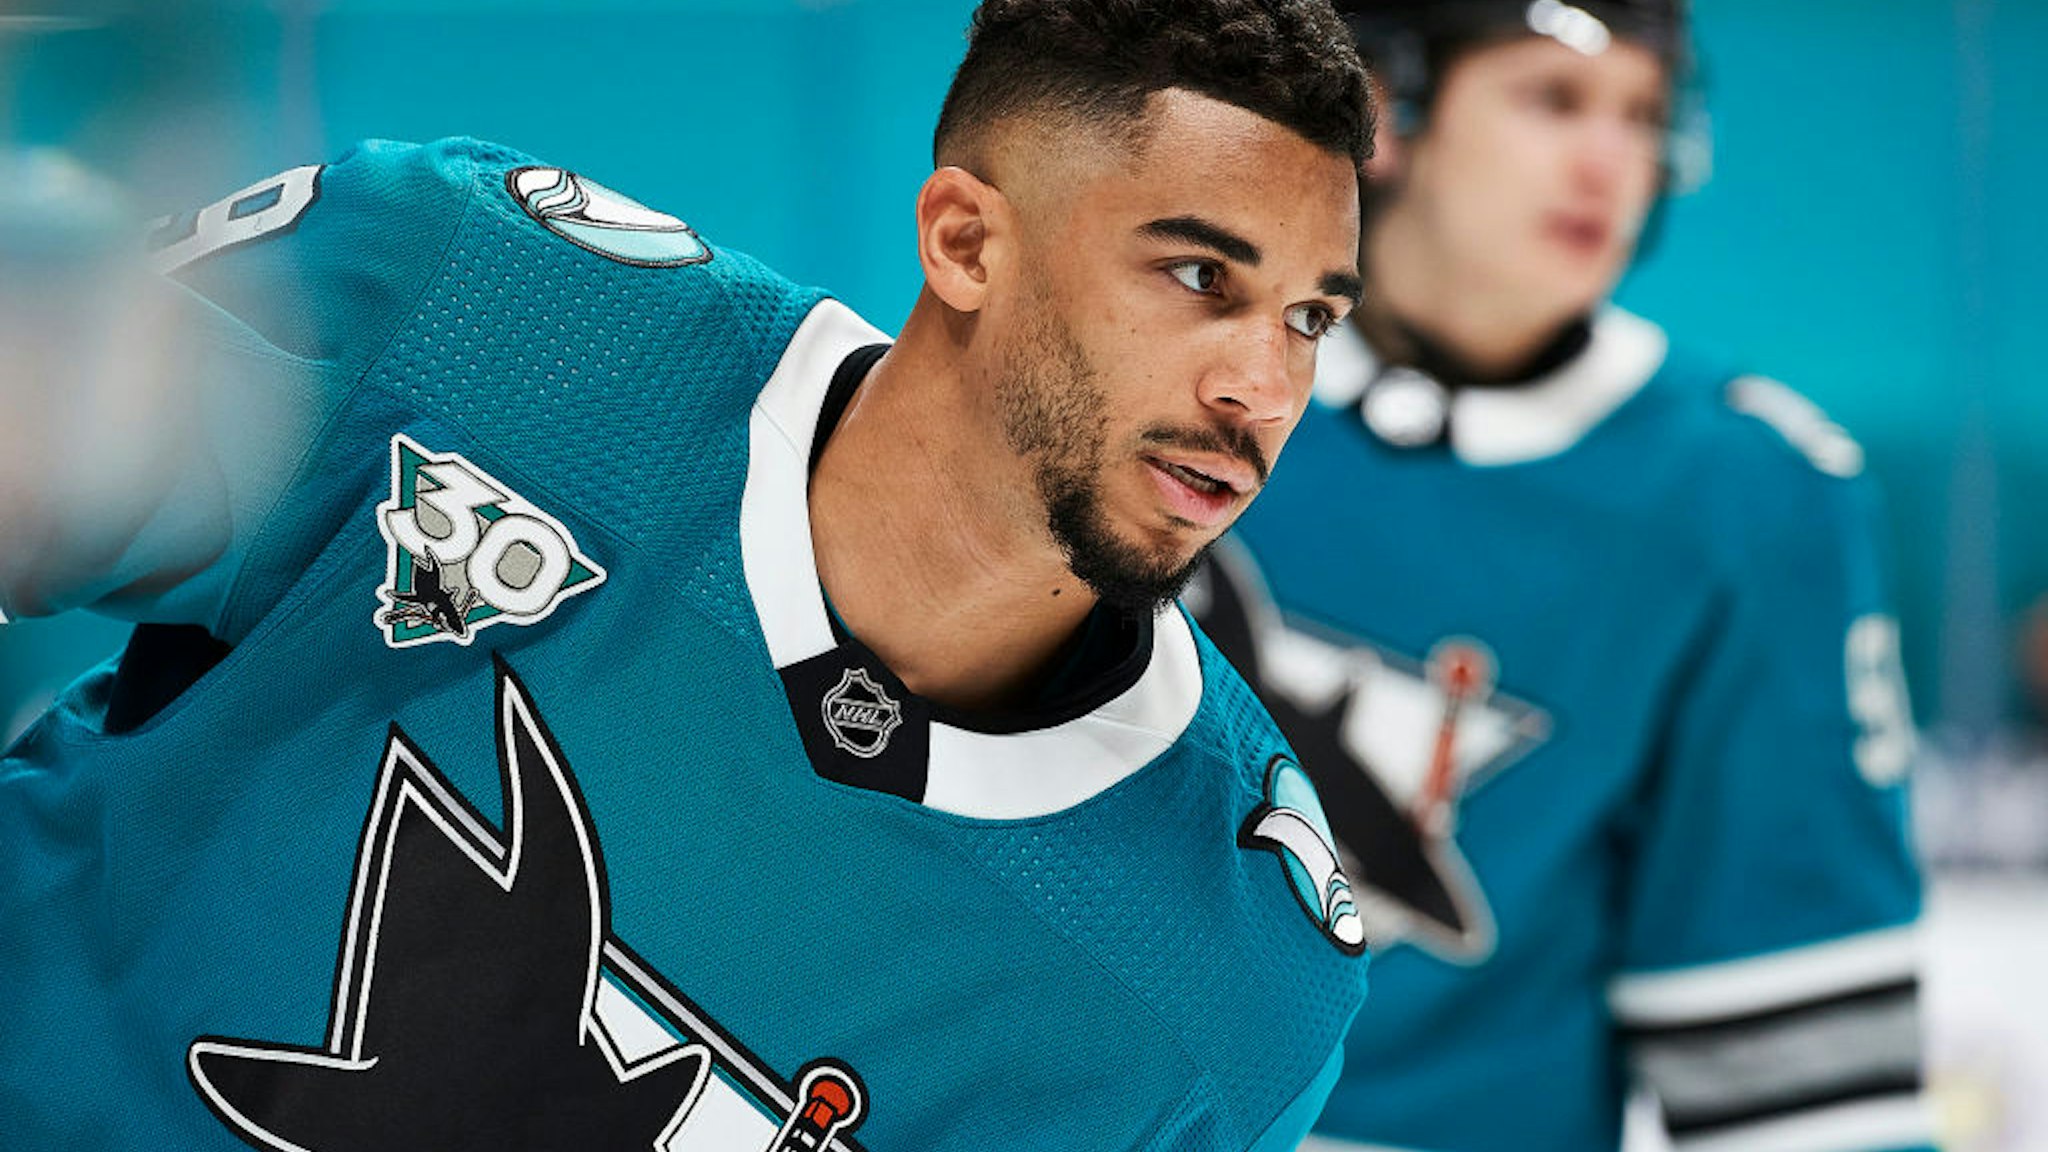 SAN JOSE, CA - MAY 12: San Jose Sharks left wing Evander Kane (9) warms up before the San Jose Sharks game versus the Vegas Golden Knights on May 12, 2021, at SAP Center at San Jose in San Jose, CA. (Photo by Matt Cohen/Icon Sportswire via Getty Images)